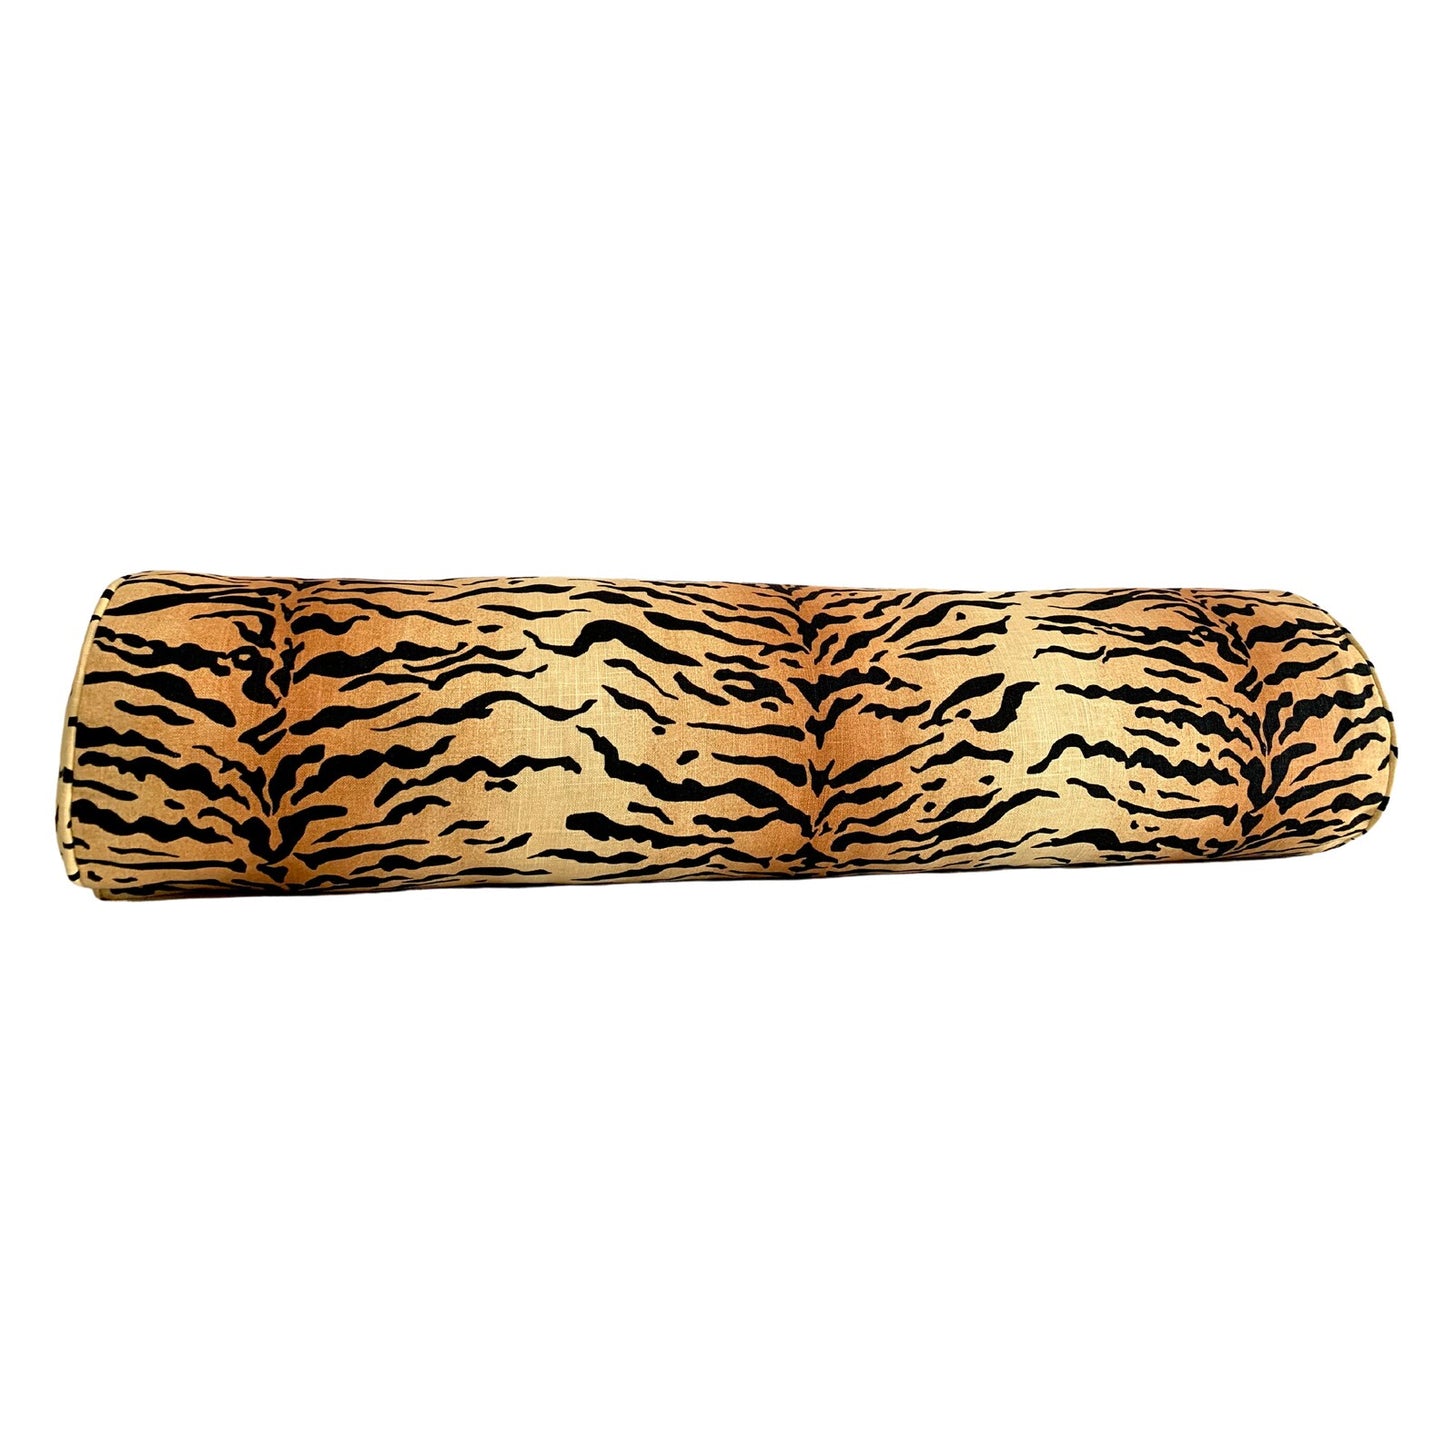 Vern Yip Amber Bengal Tiger Stripe Pillow Cover - Available in Bolster, Lumbar, Throw, Euro Sham Sizes